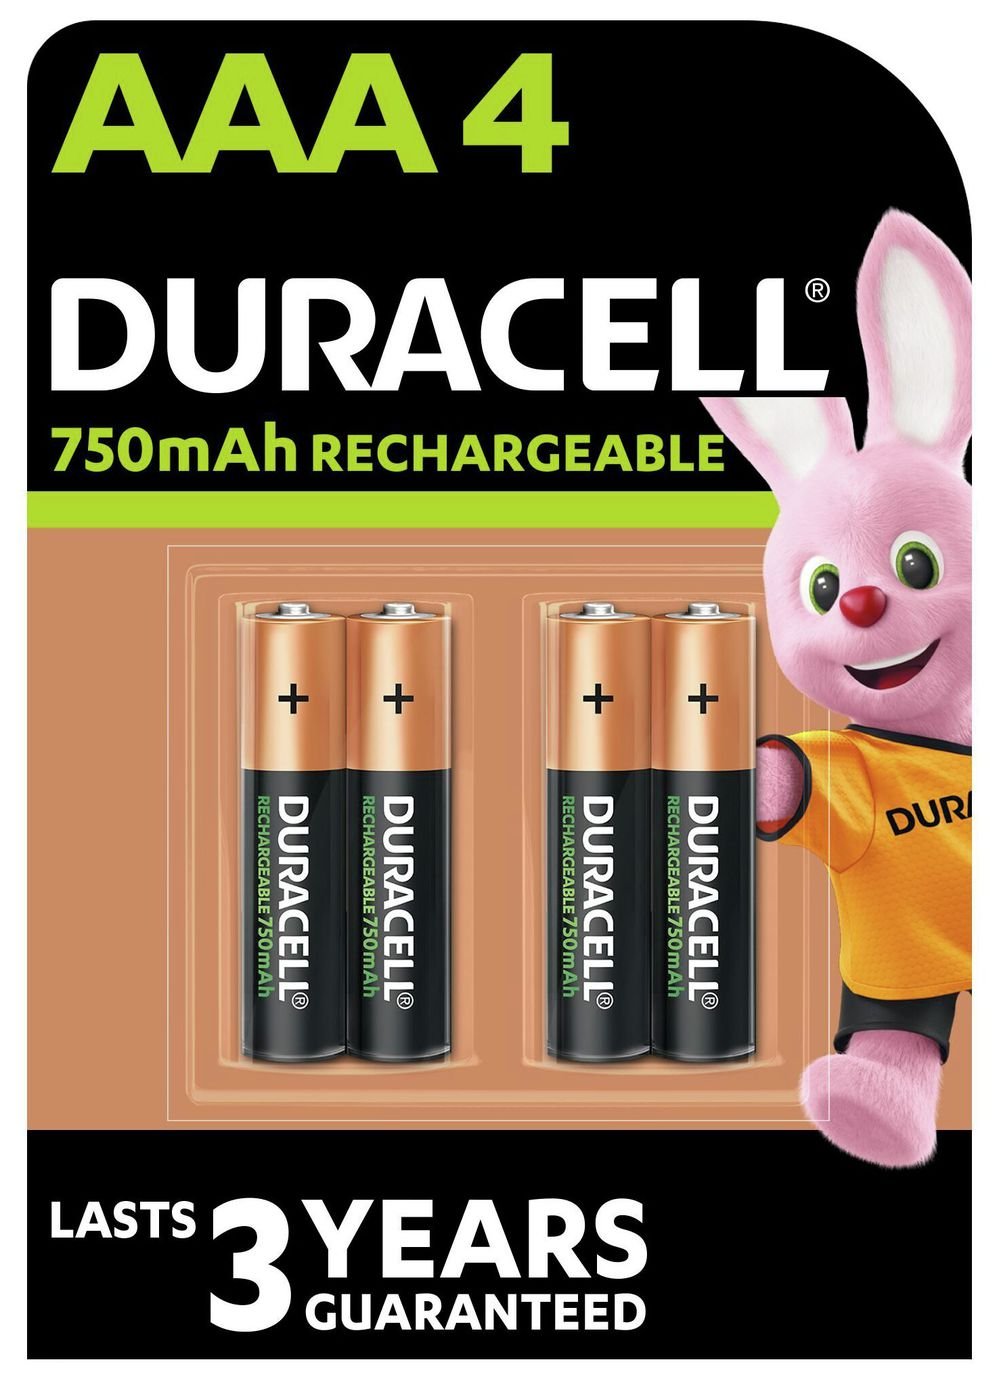 Duracell Recharge Plus AAA Rechargeable Batteries -pack of 4 review